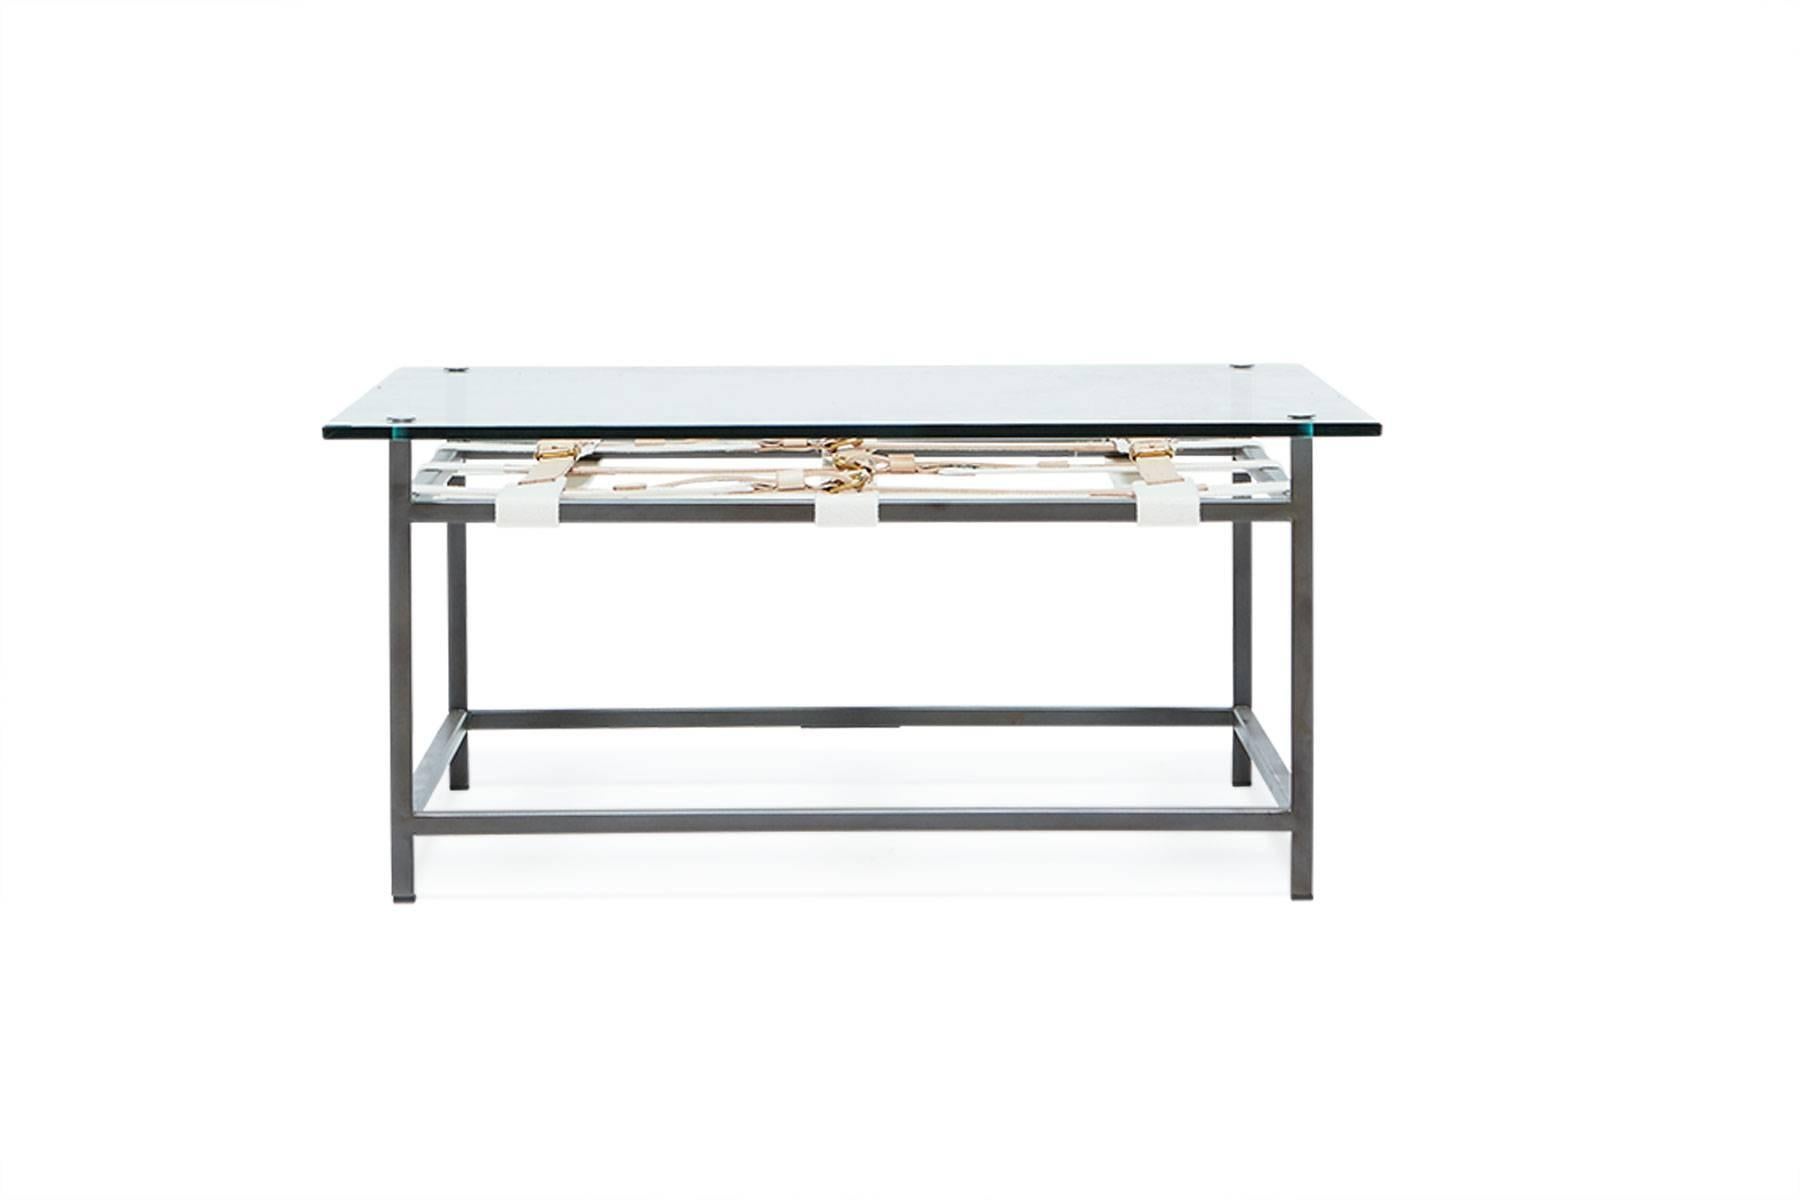 A glass topped coffee table that utilizes the signature Inheritance collection belts. The steel frame has a blackened steel finish and natural cotton webbing belts with natural veg tanned leather and polished brass buckles.

This item is made to